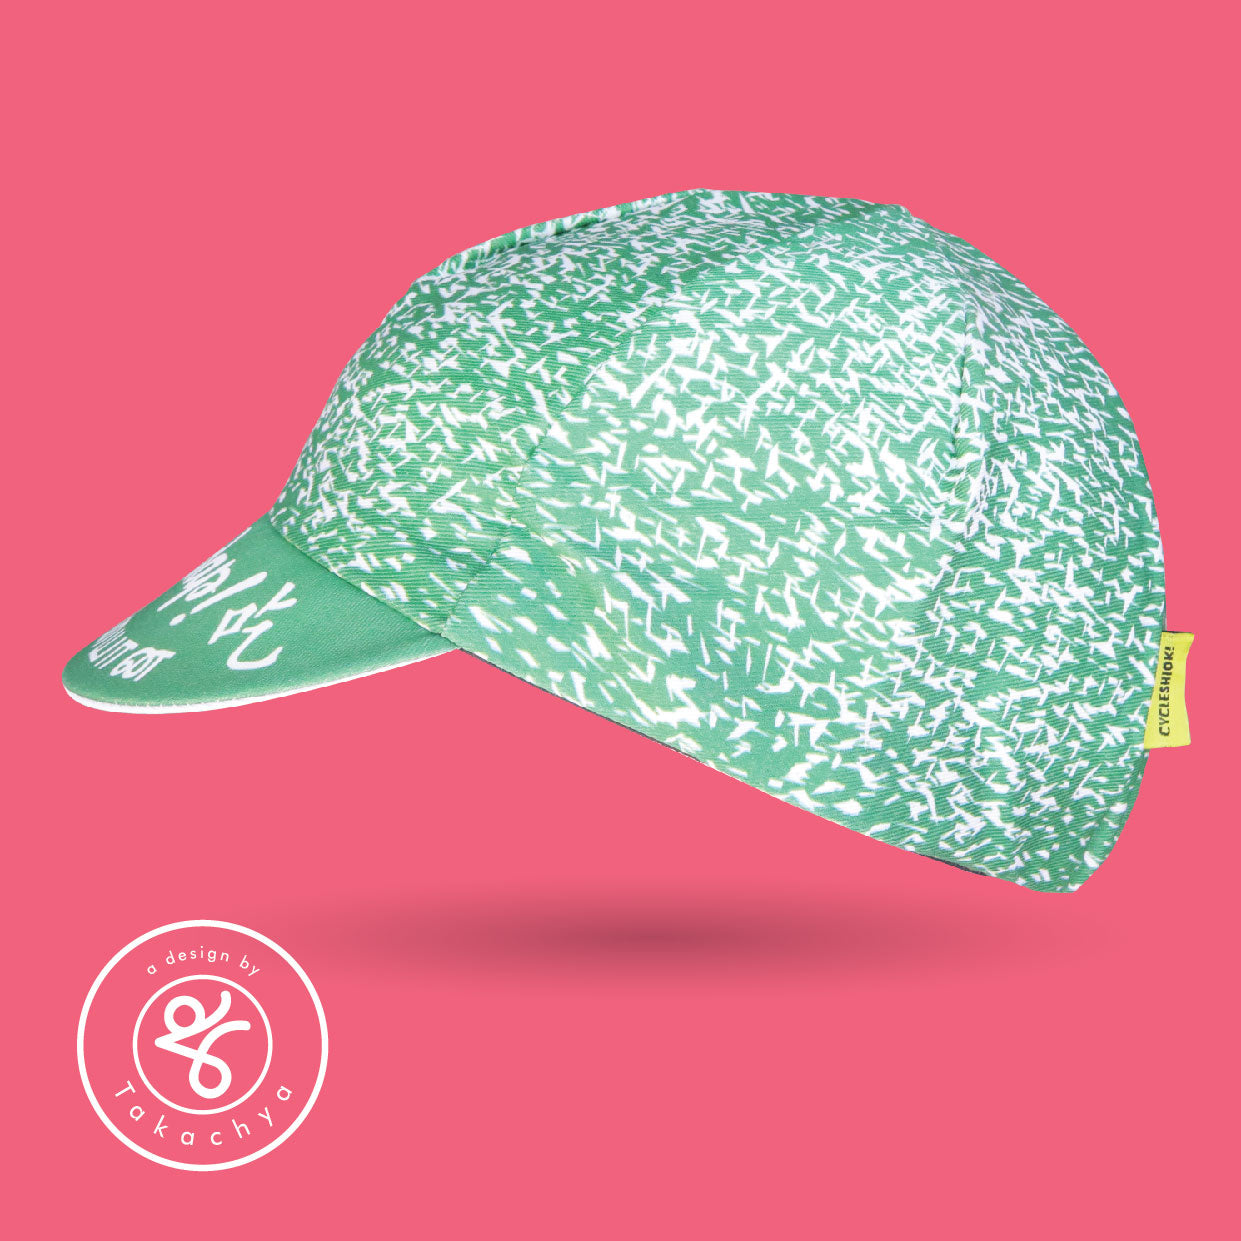 Me Love Ondeh Ondeh - A Design by Takachya Cycling Cap